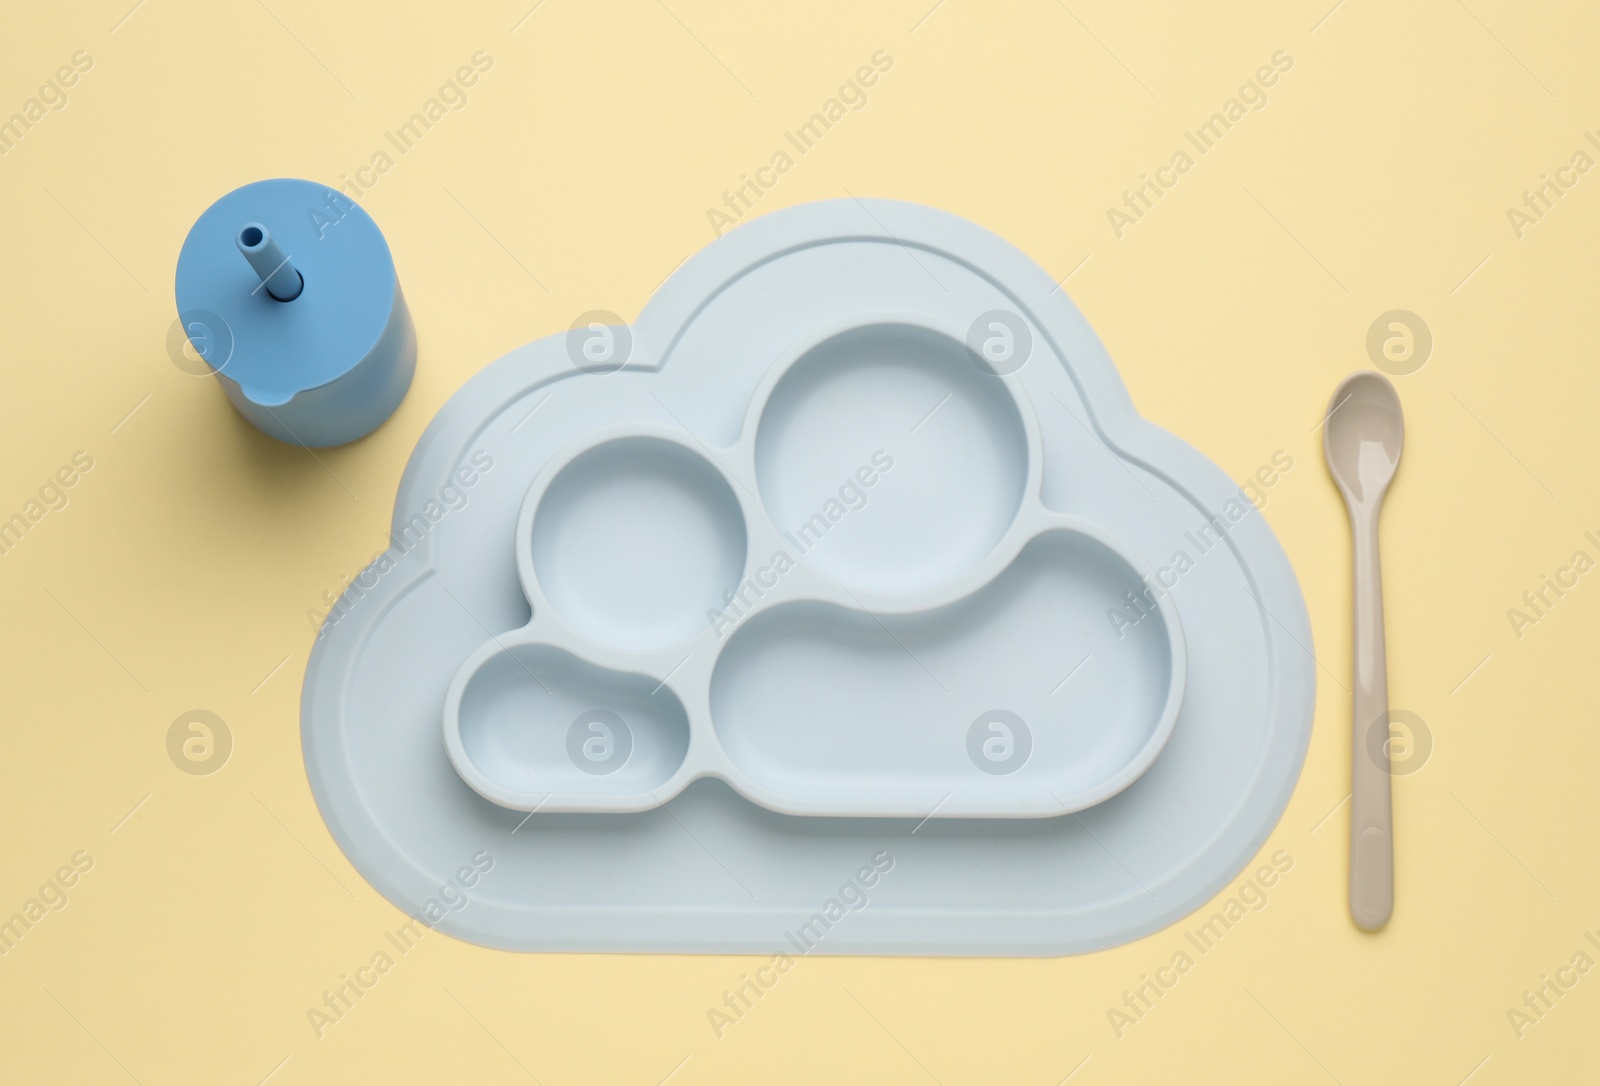 Photo of Set of plastic dishware on beige background, flat lay. Serving baby food